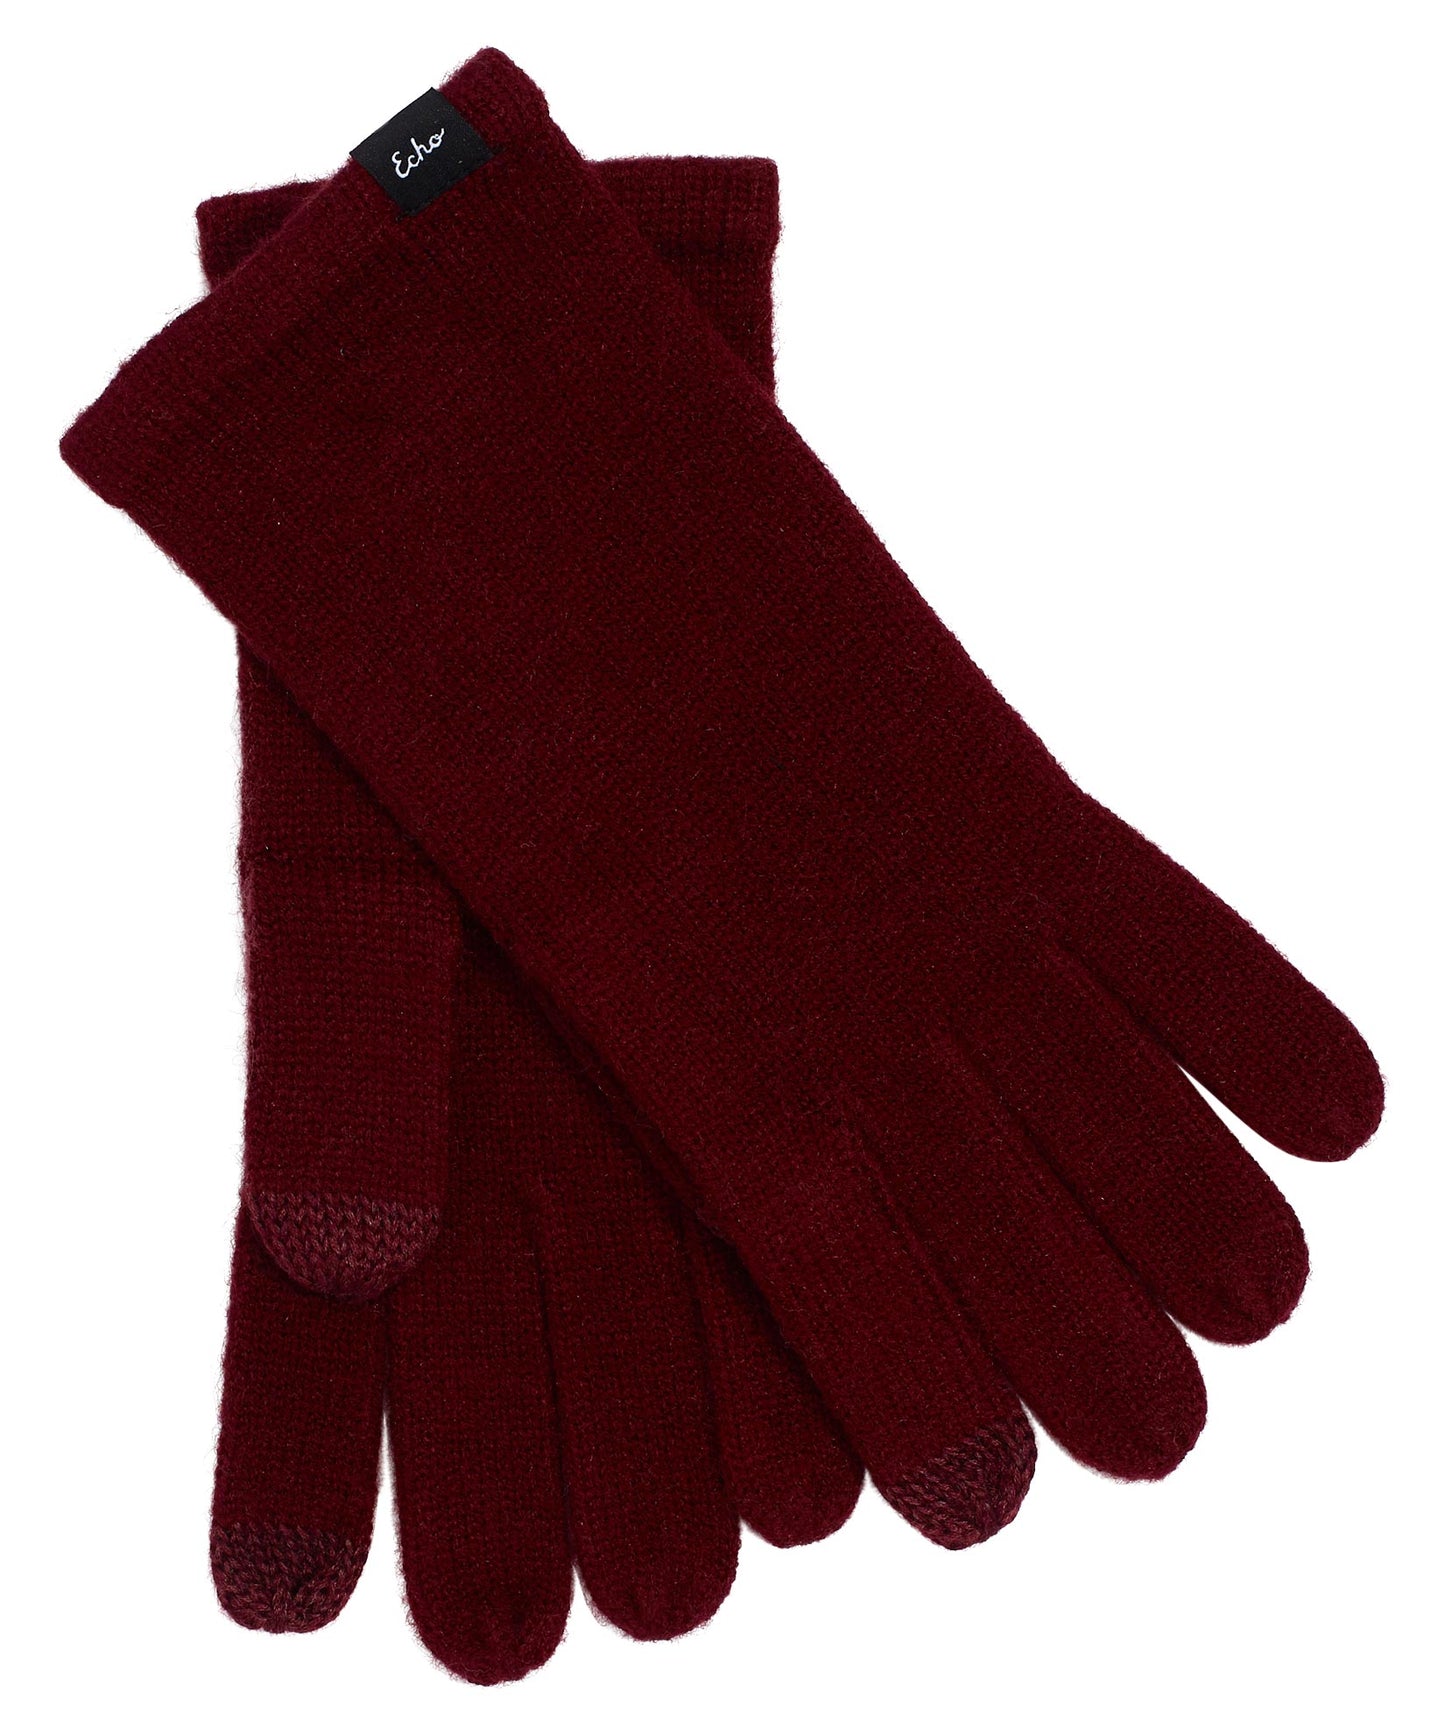 Echo Knit Touch Glove in color Garnet